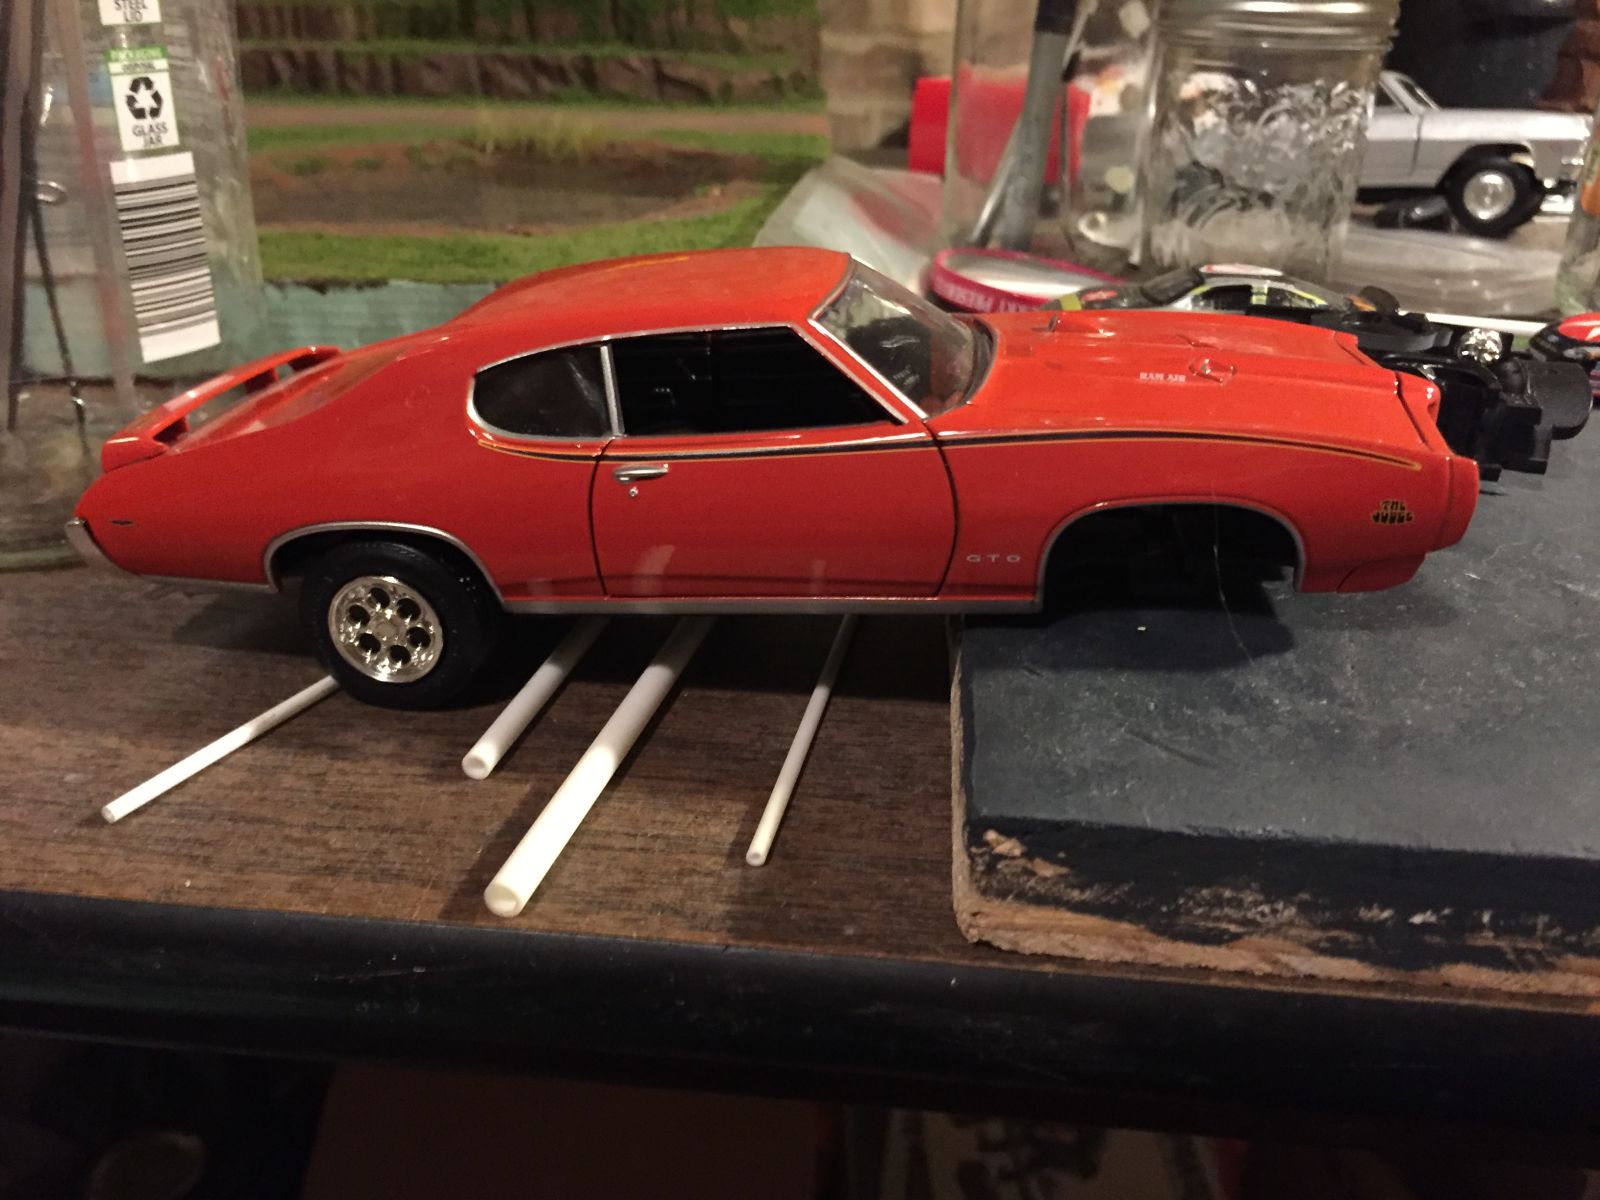 Tires stolen from a Chevelle model kit...I think.